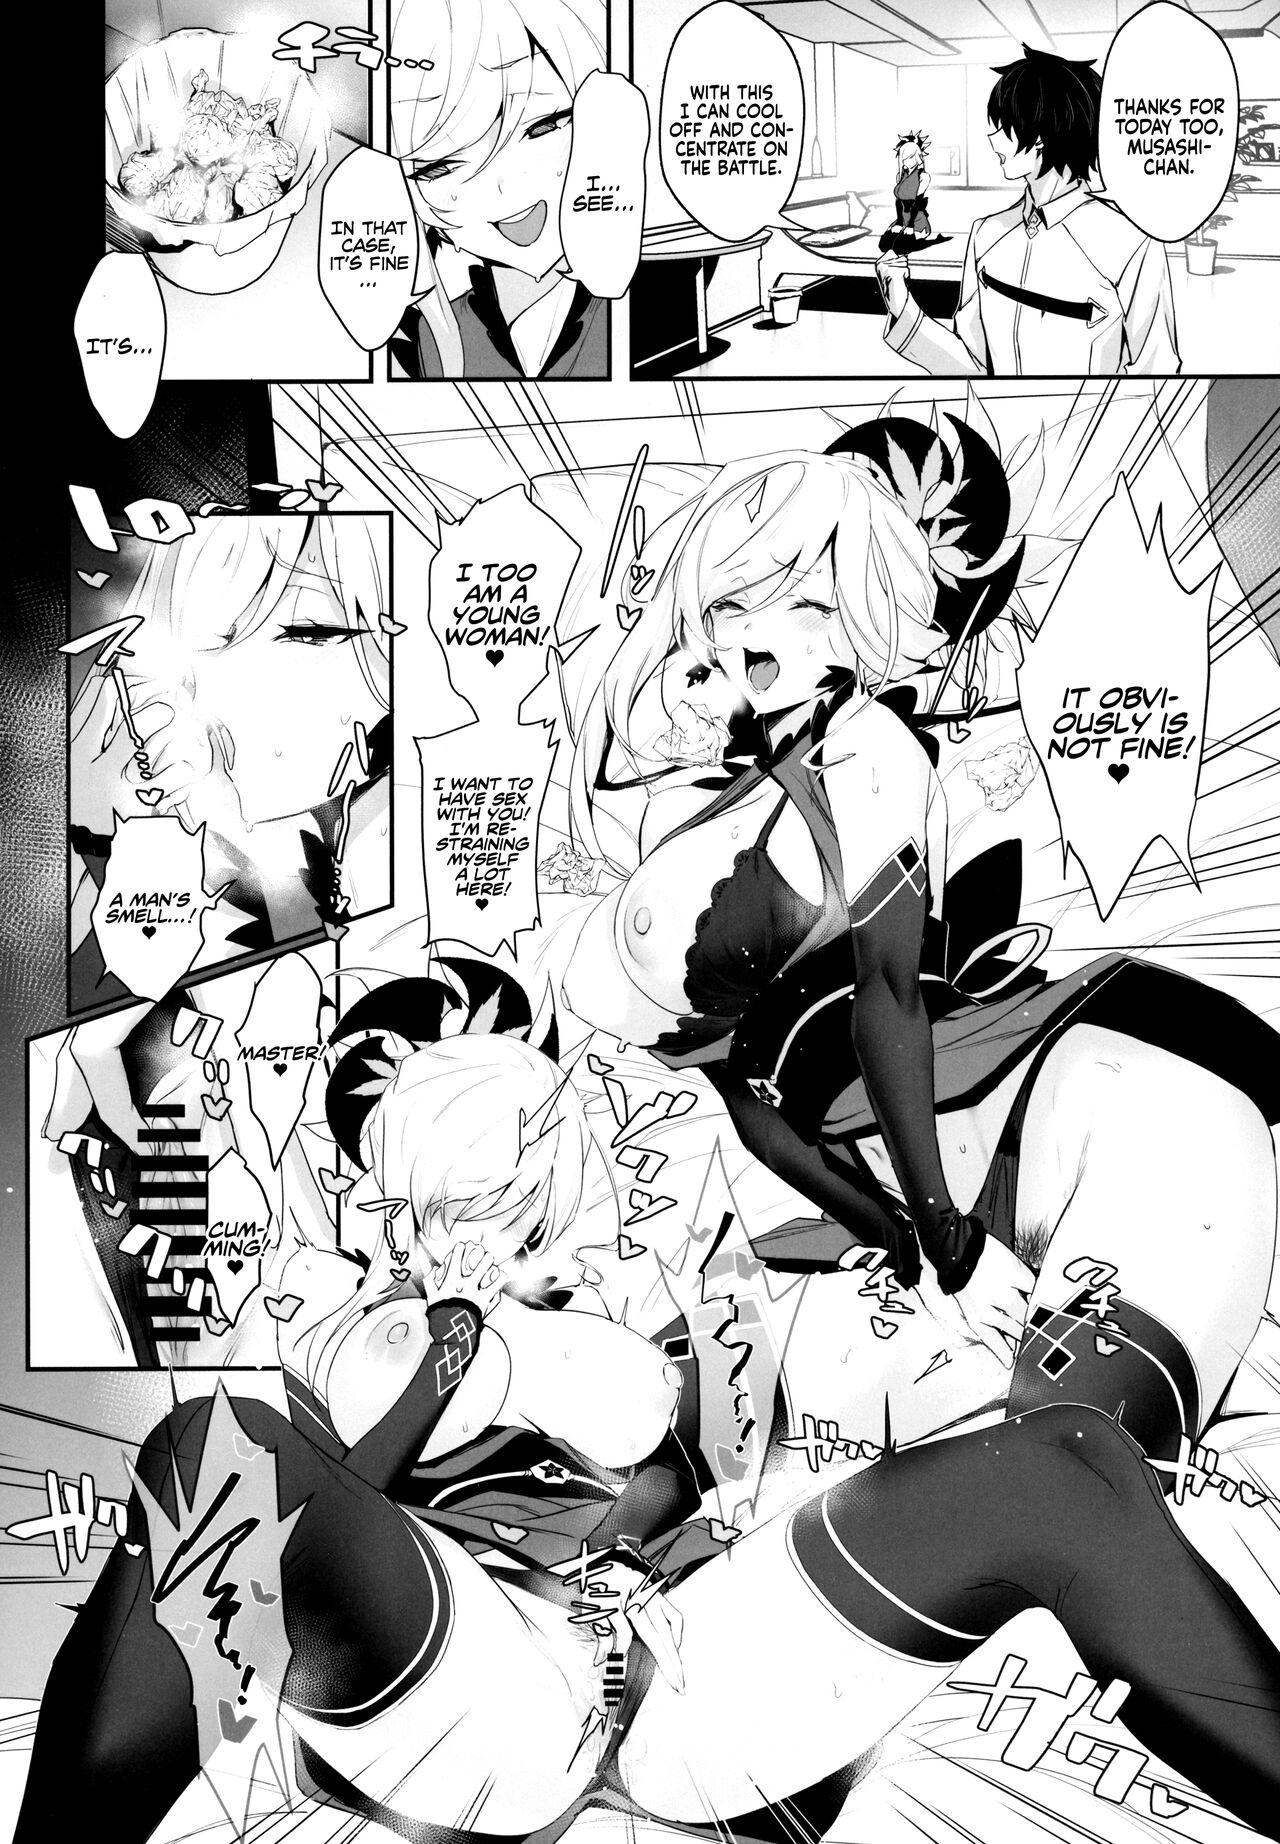 Punish (C101) [Jitaku Vacation (Ulrich)] ServaLove! Vol2! A Late-Blooming Musashi-chan in Love is Defeated by Nipple Torture and Lovey-Dovey Sex (Fate/Grand Order) [English] [Coffedrug] - Fate grand order Titties - Page 6